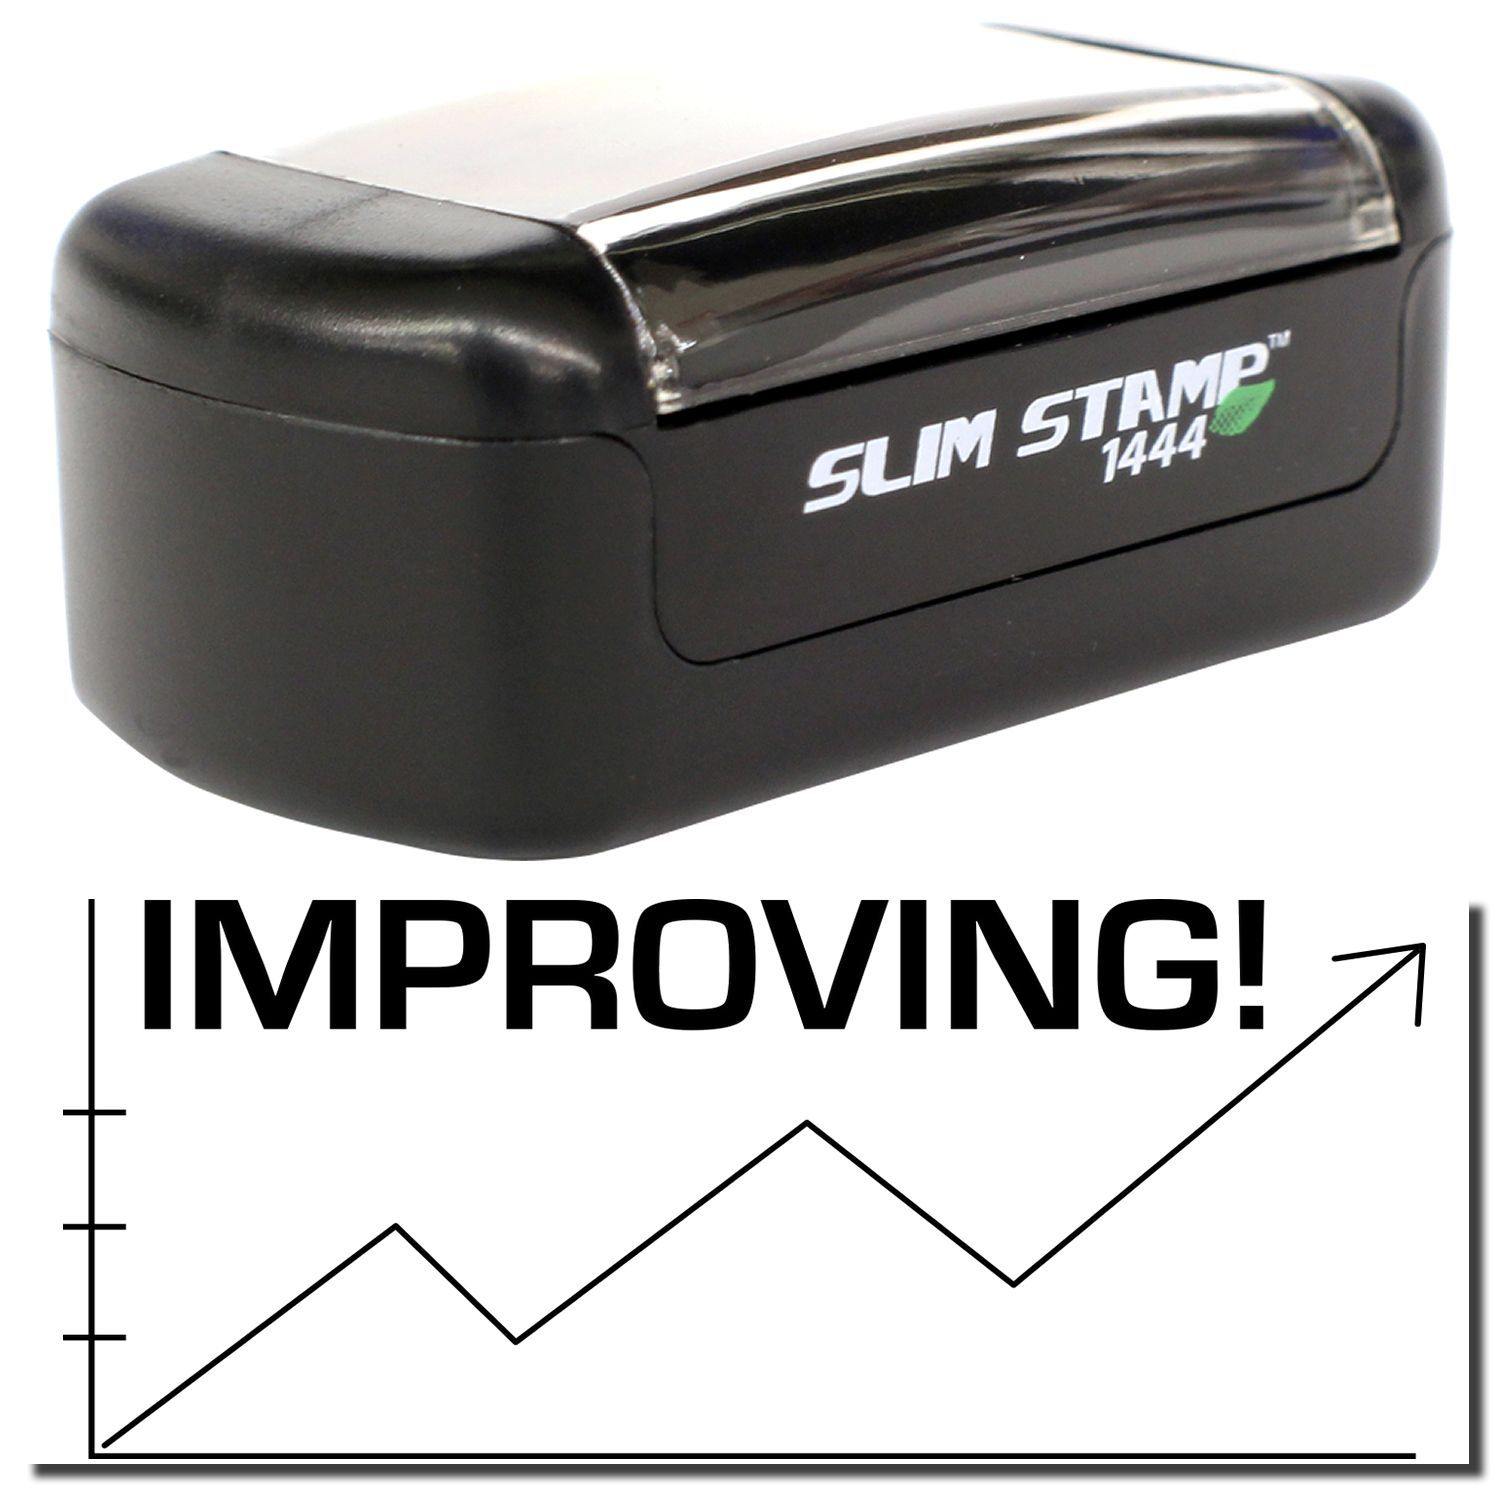 A stock office pre-inked stamp with a stamped image showing how the text "IMPROVING!" with an image of a chart showing an arrow moving up, down, and back up again is displayed after stamping.